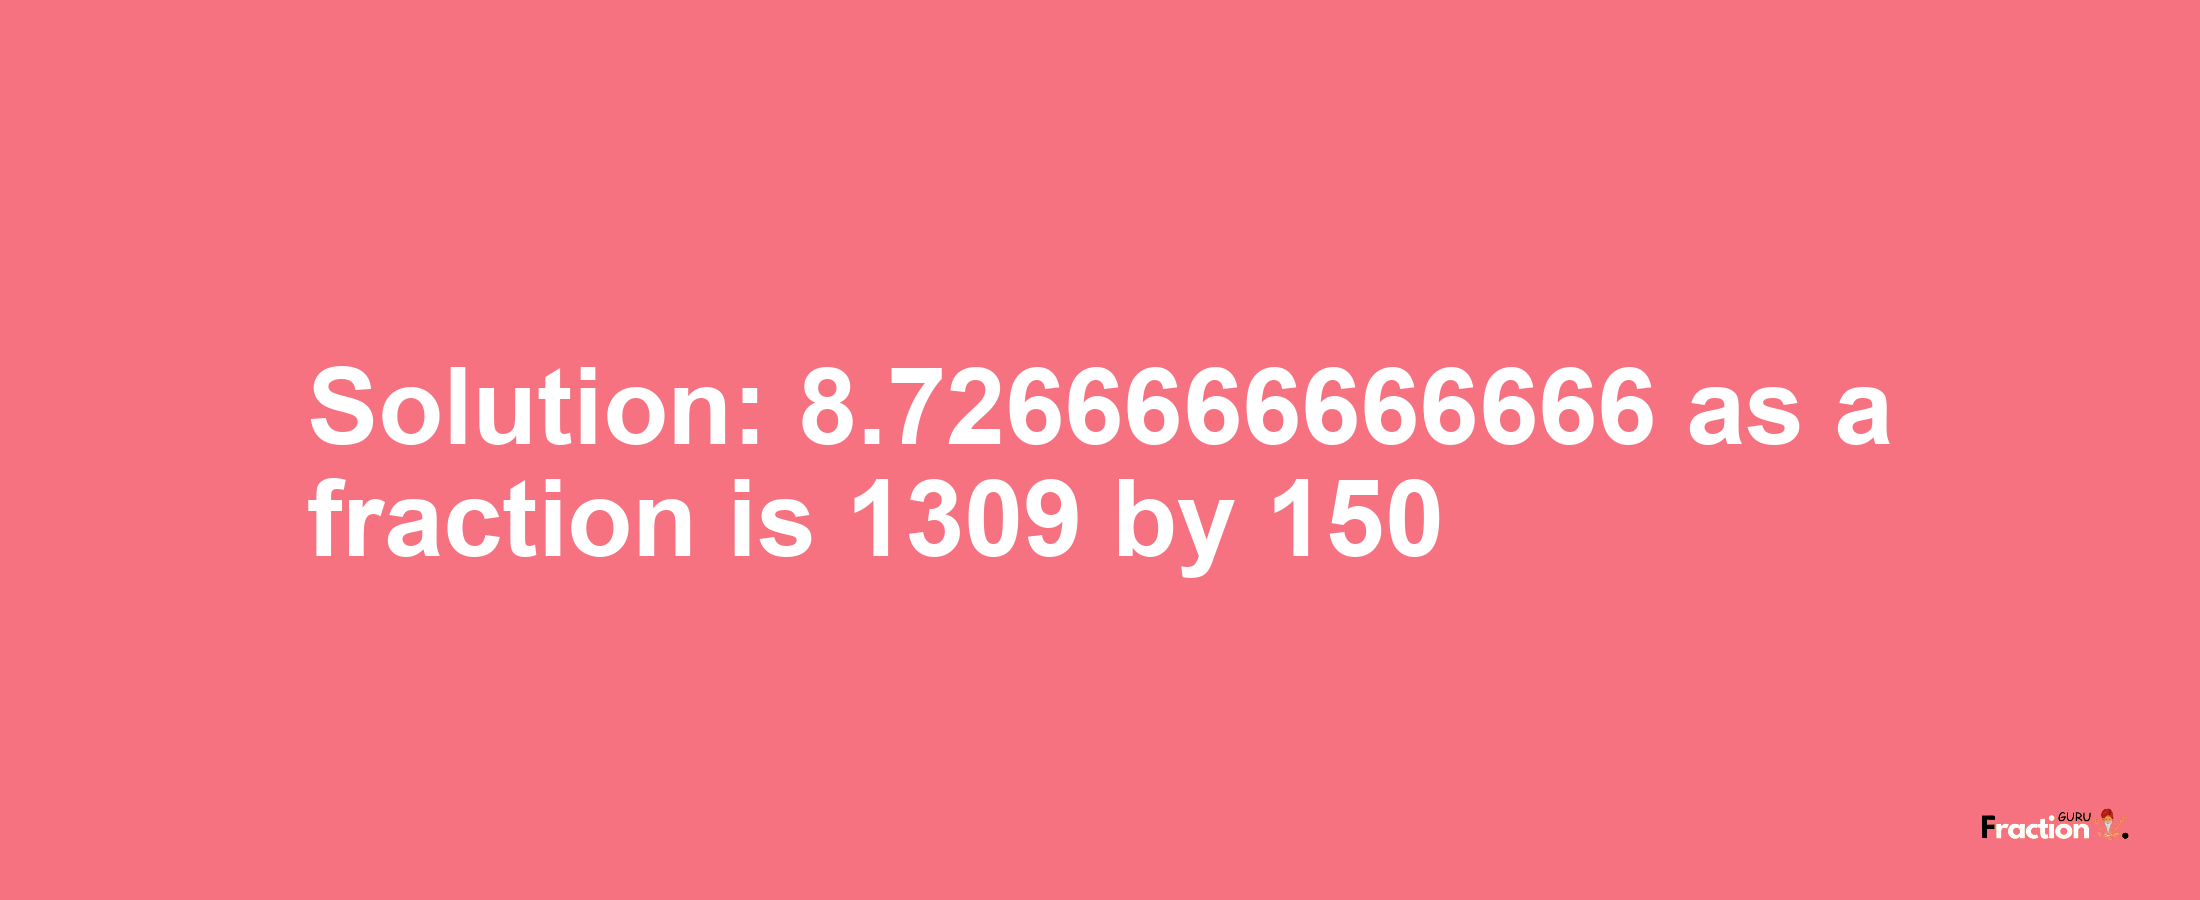 Solution:8.7266666666666 as a fraction is 1309/150